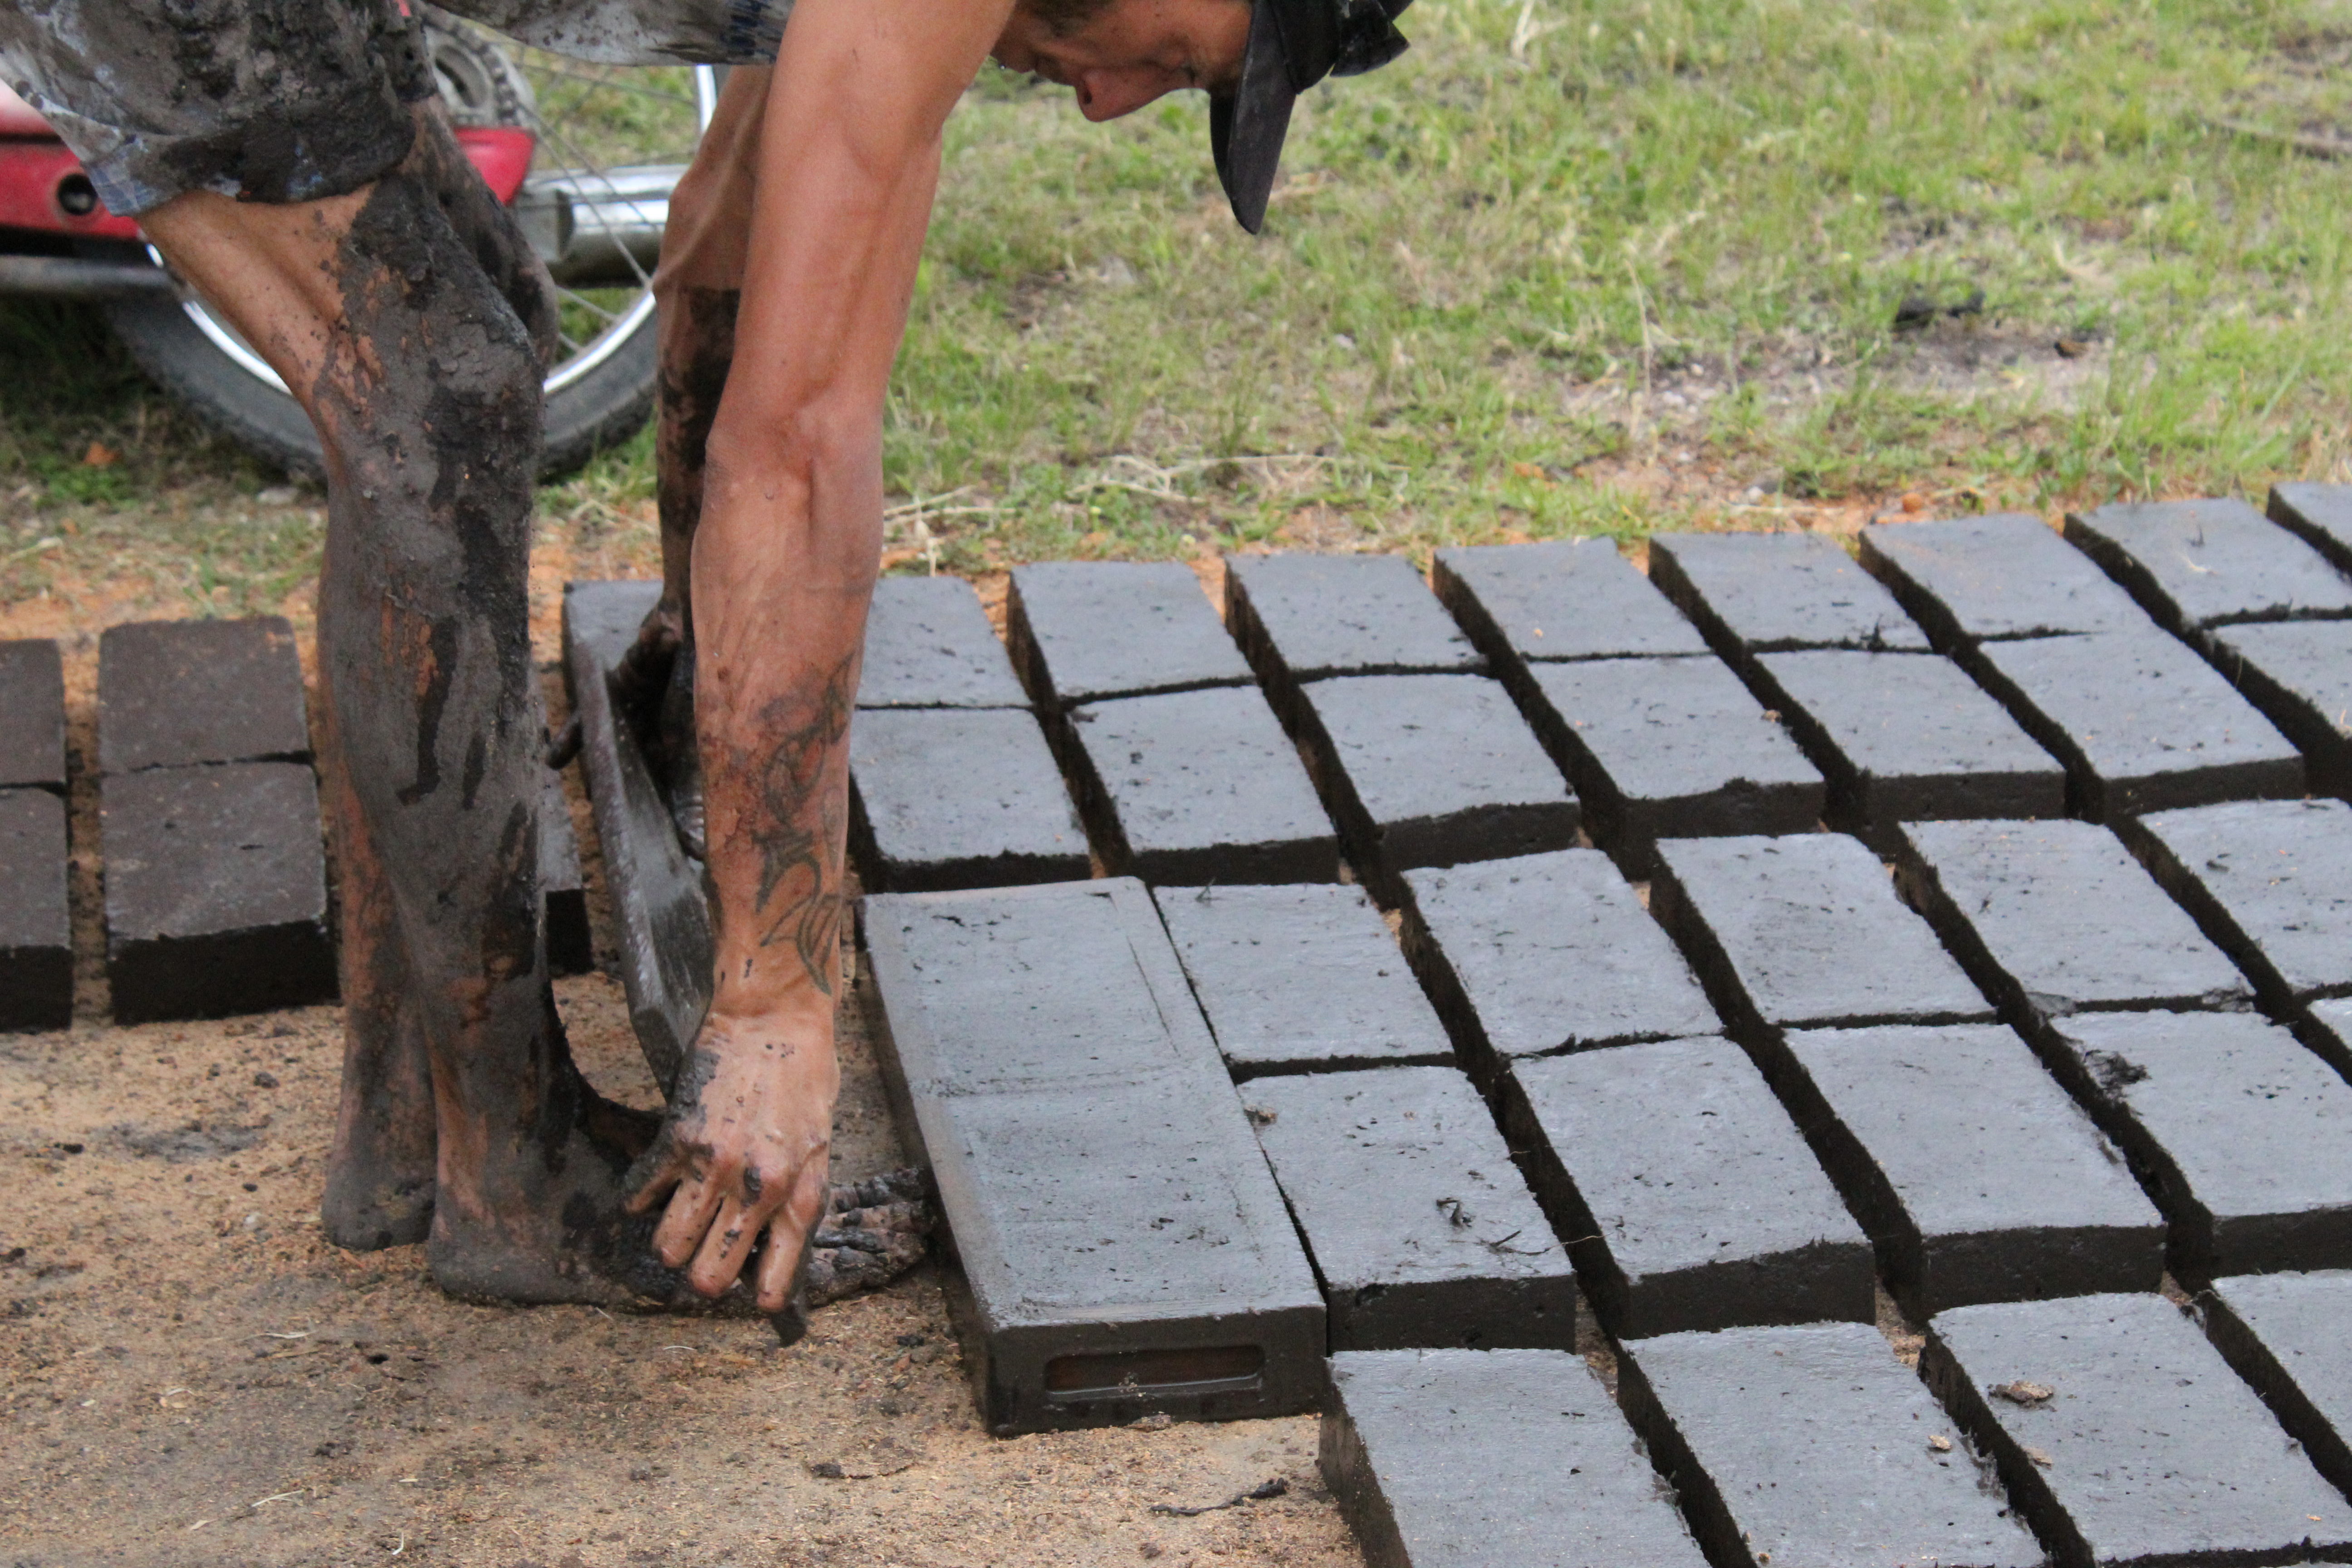 Artisanal brickmakers put the raw material into a mold, and then lay it out to dry. (Photo by Pablo Montes.)